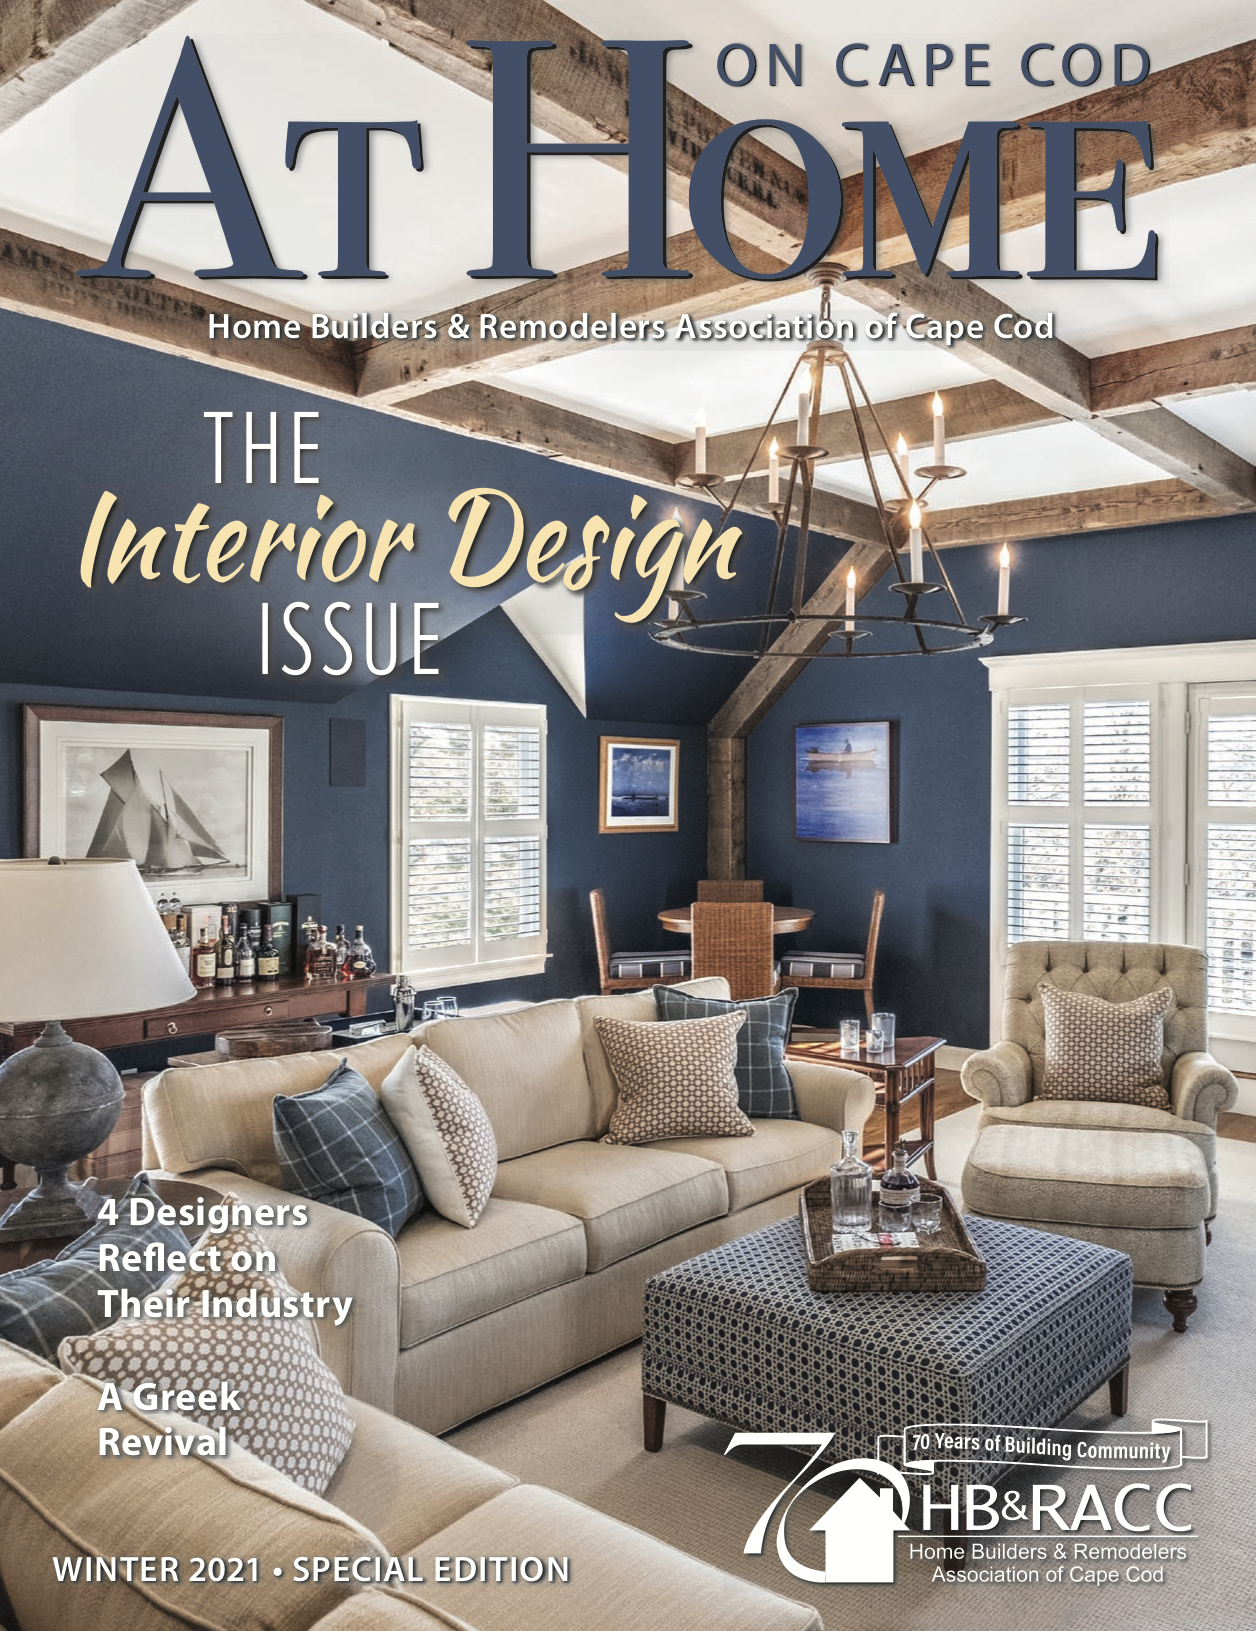 At Home on Cape Cod, the Interior Design Issue January 2021  Featuring Donna Elle